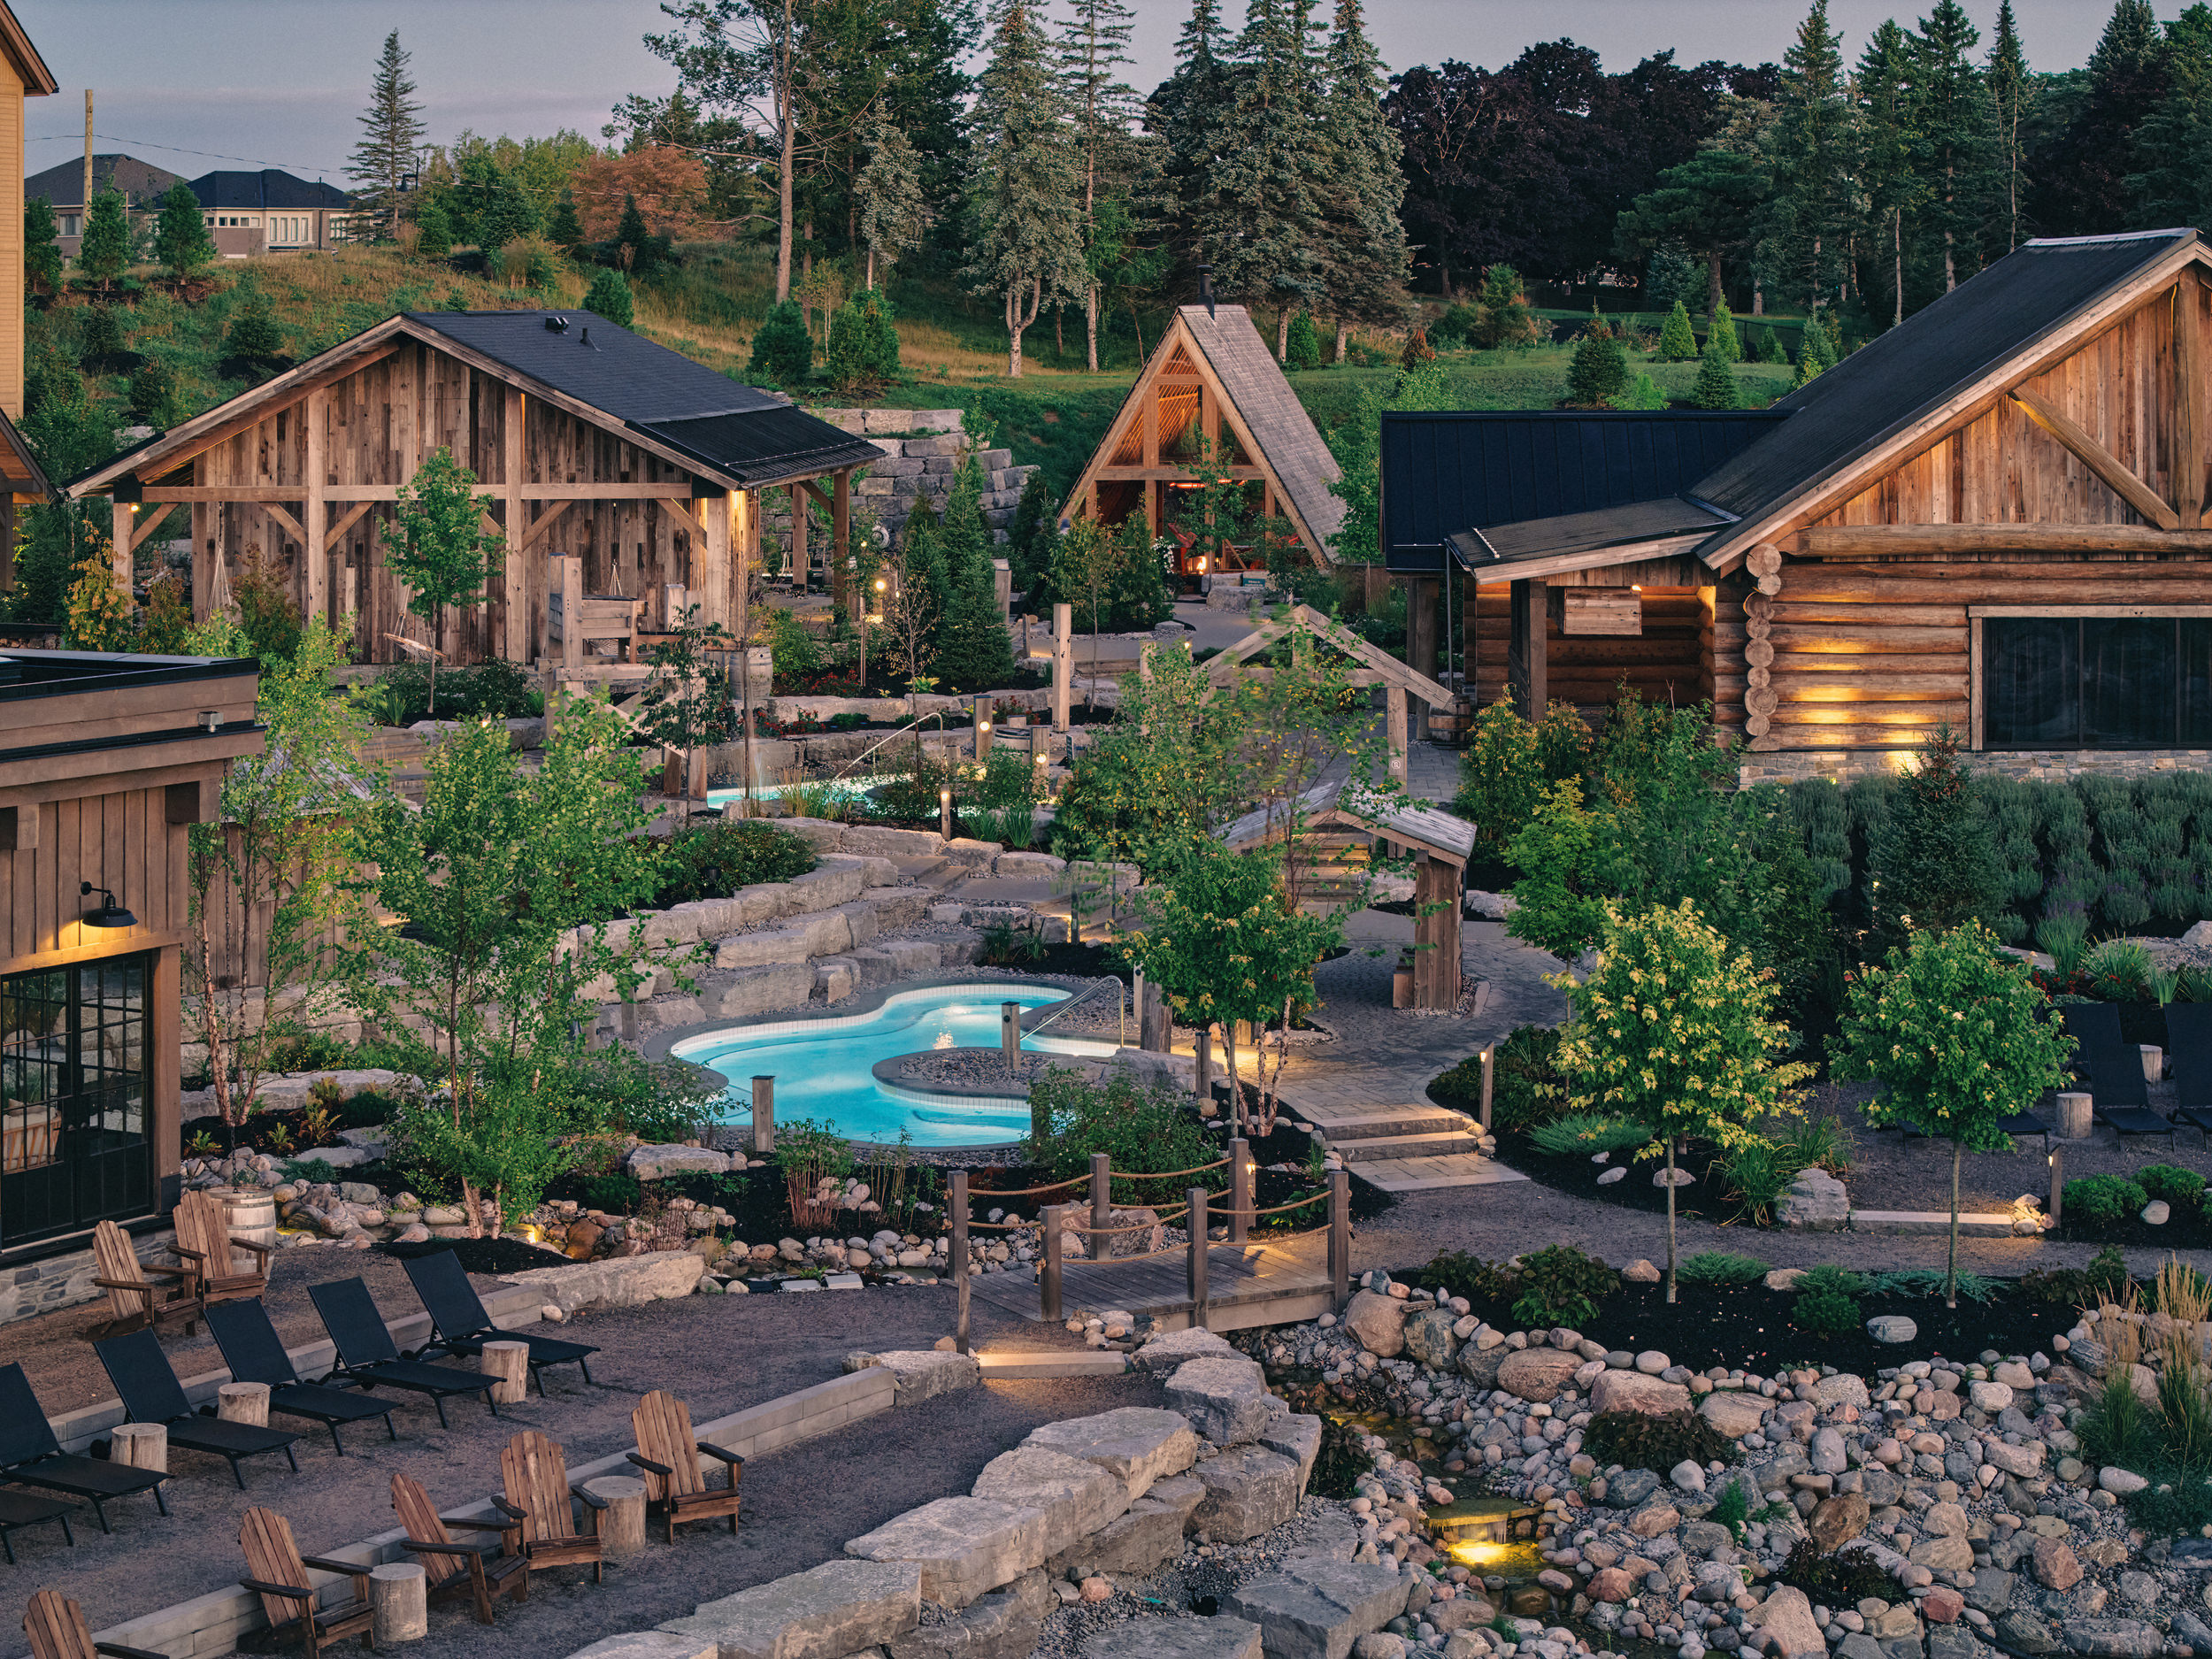 View looking down on a luxury spa village with wooden cabins and pools